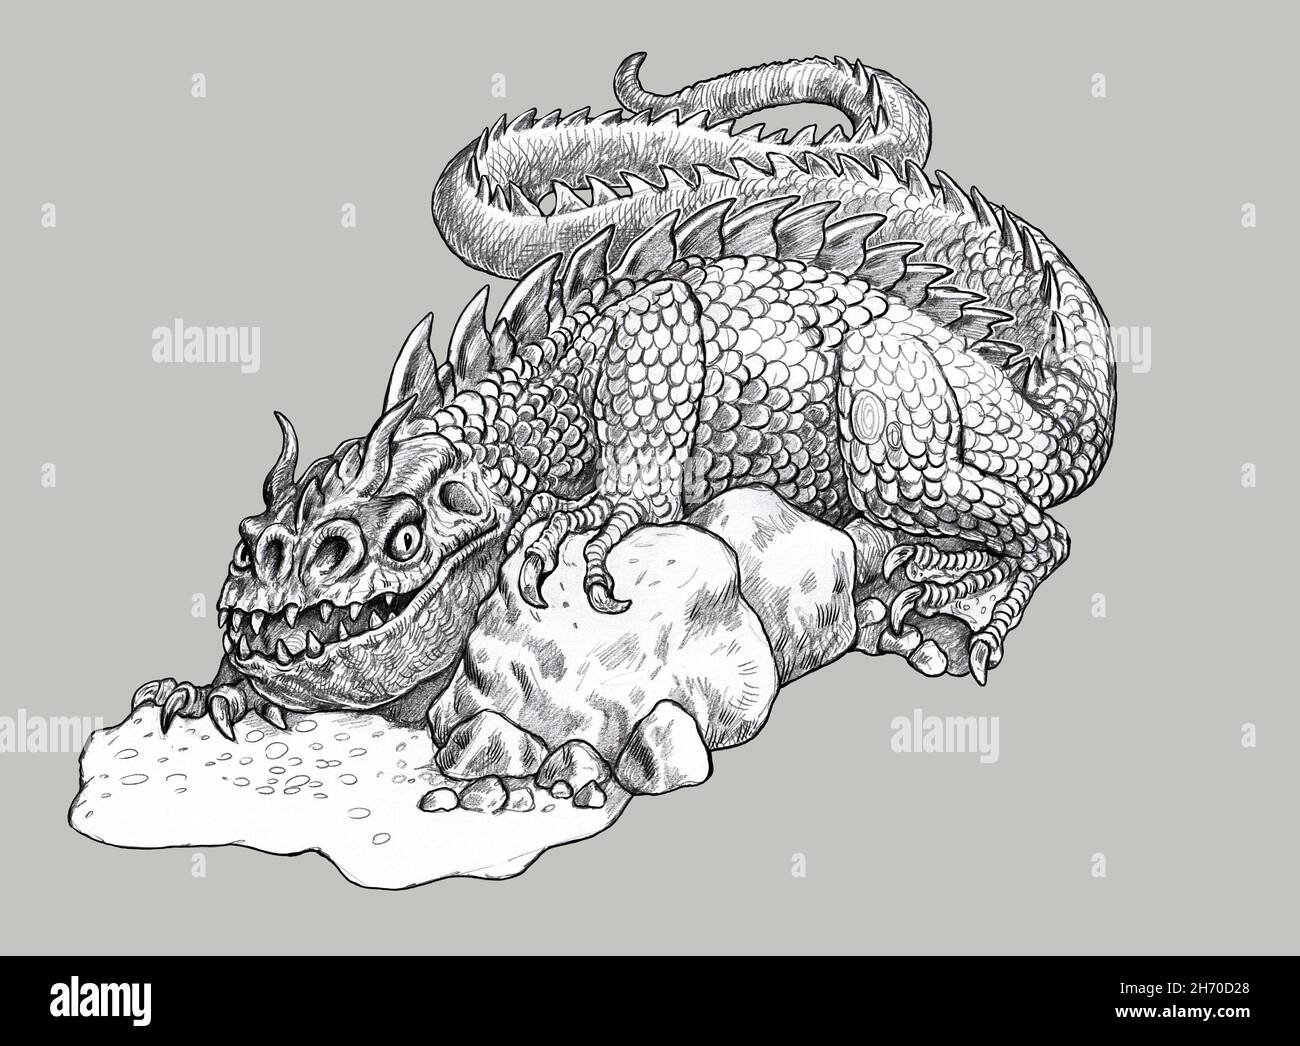 Funny dragon with horns. Fantasy drawing. Stock Photo